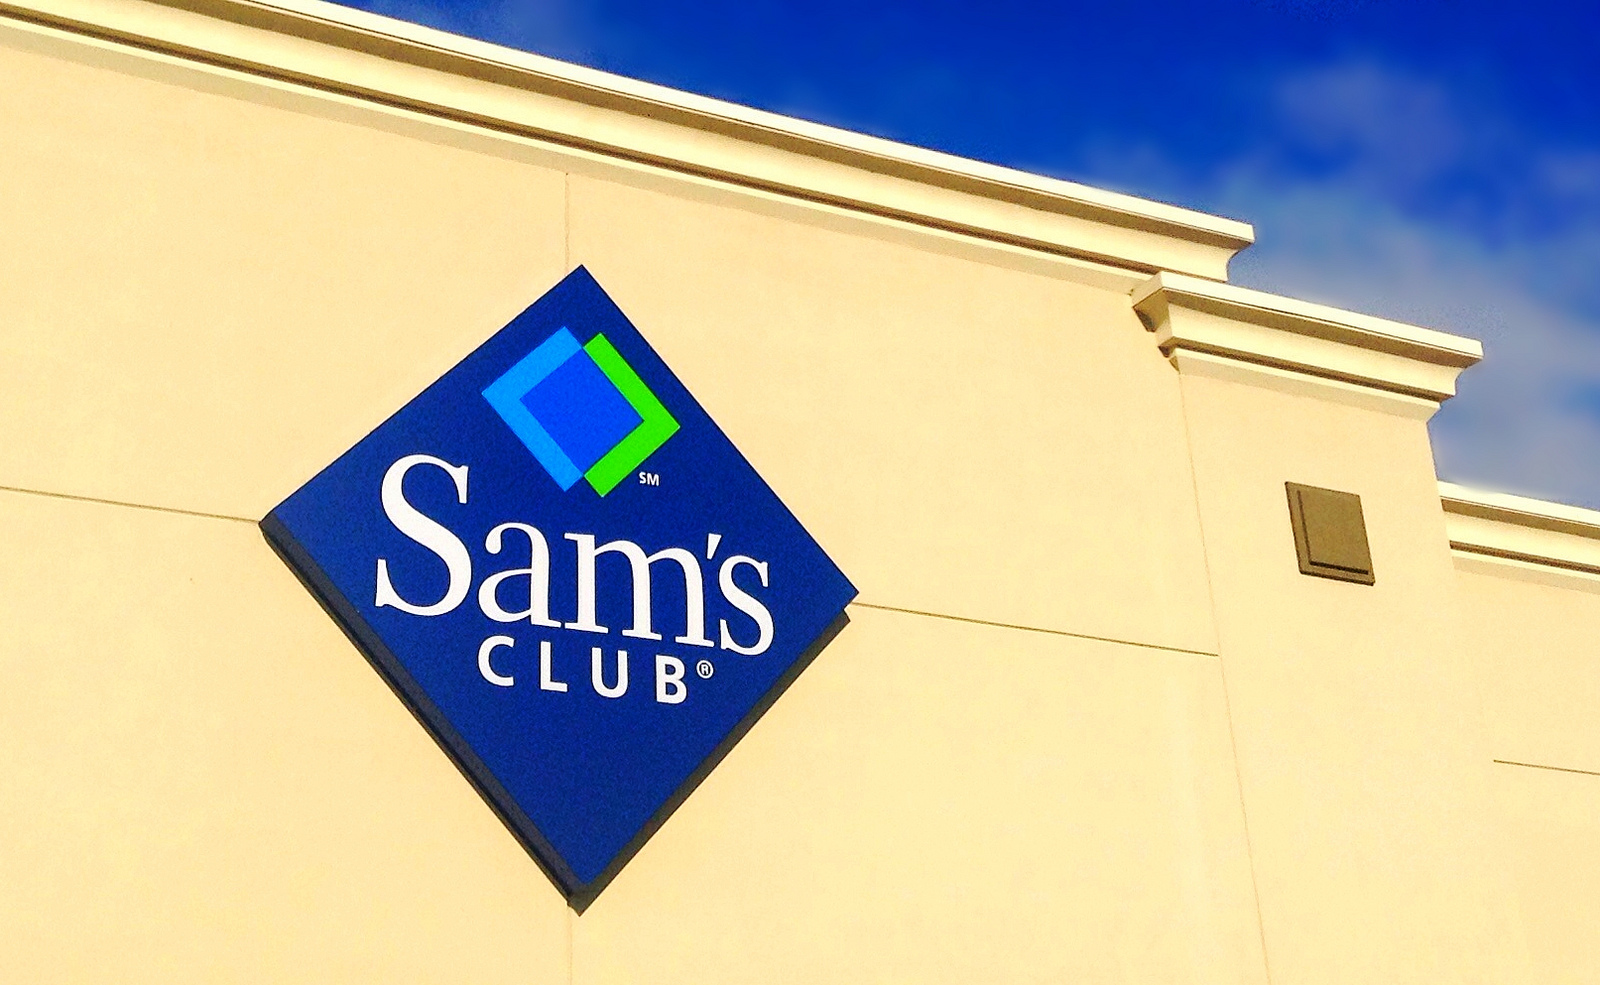 Sam’s Club Revamping Its Grocery Offerings To Better Compete With Costco, Other Retailers